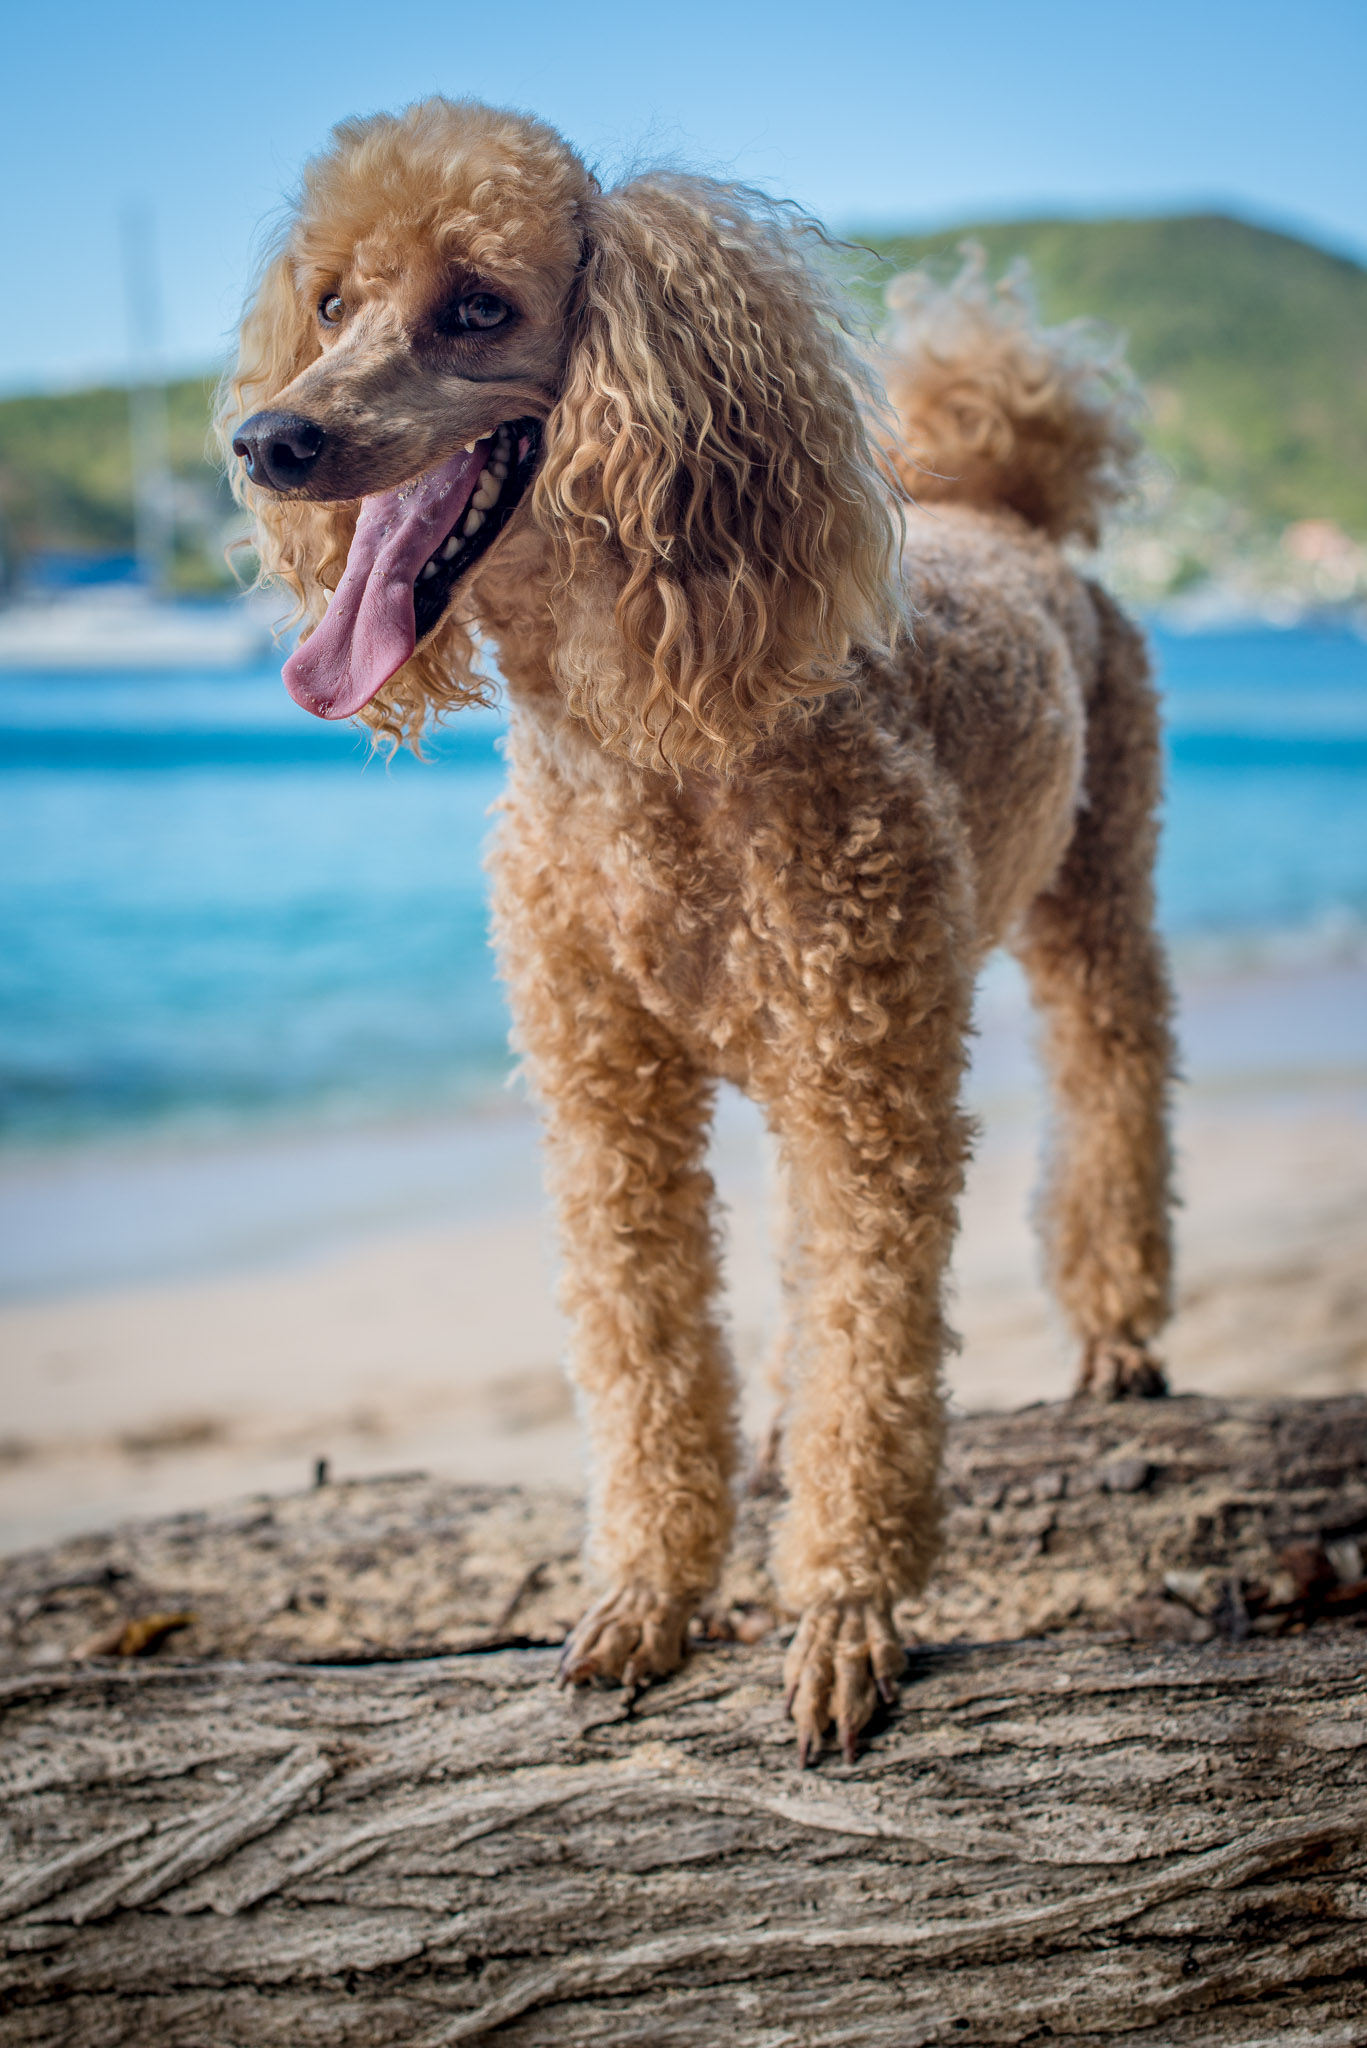 Poodle on beach